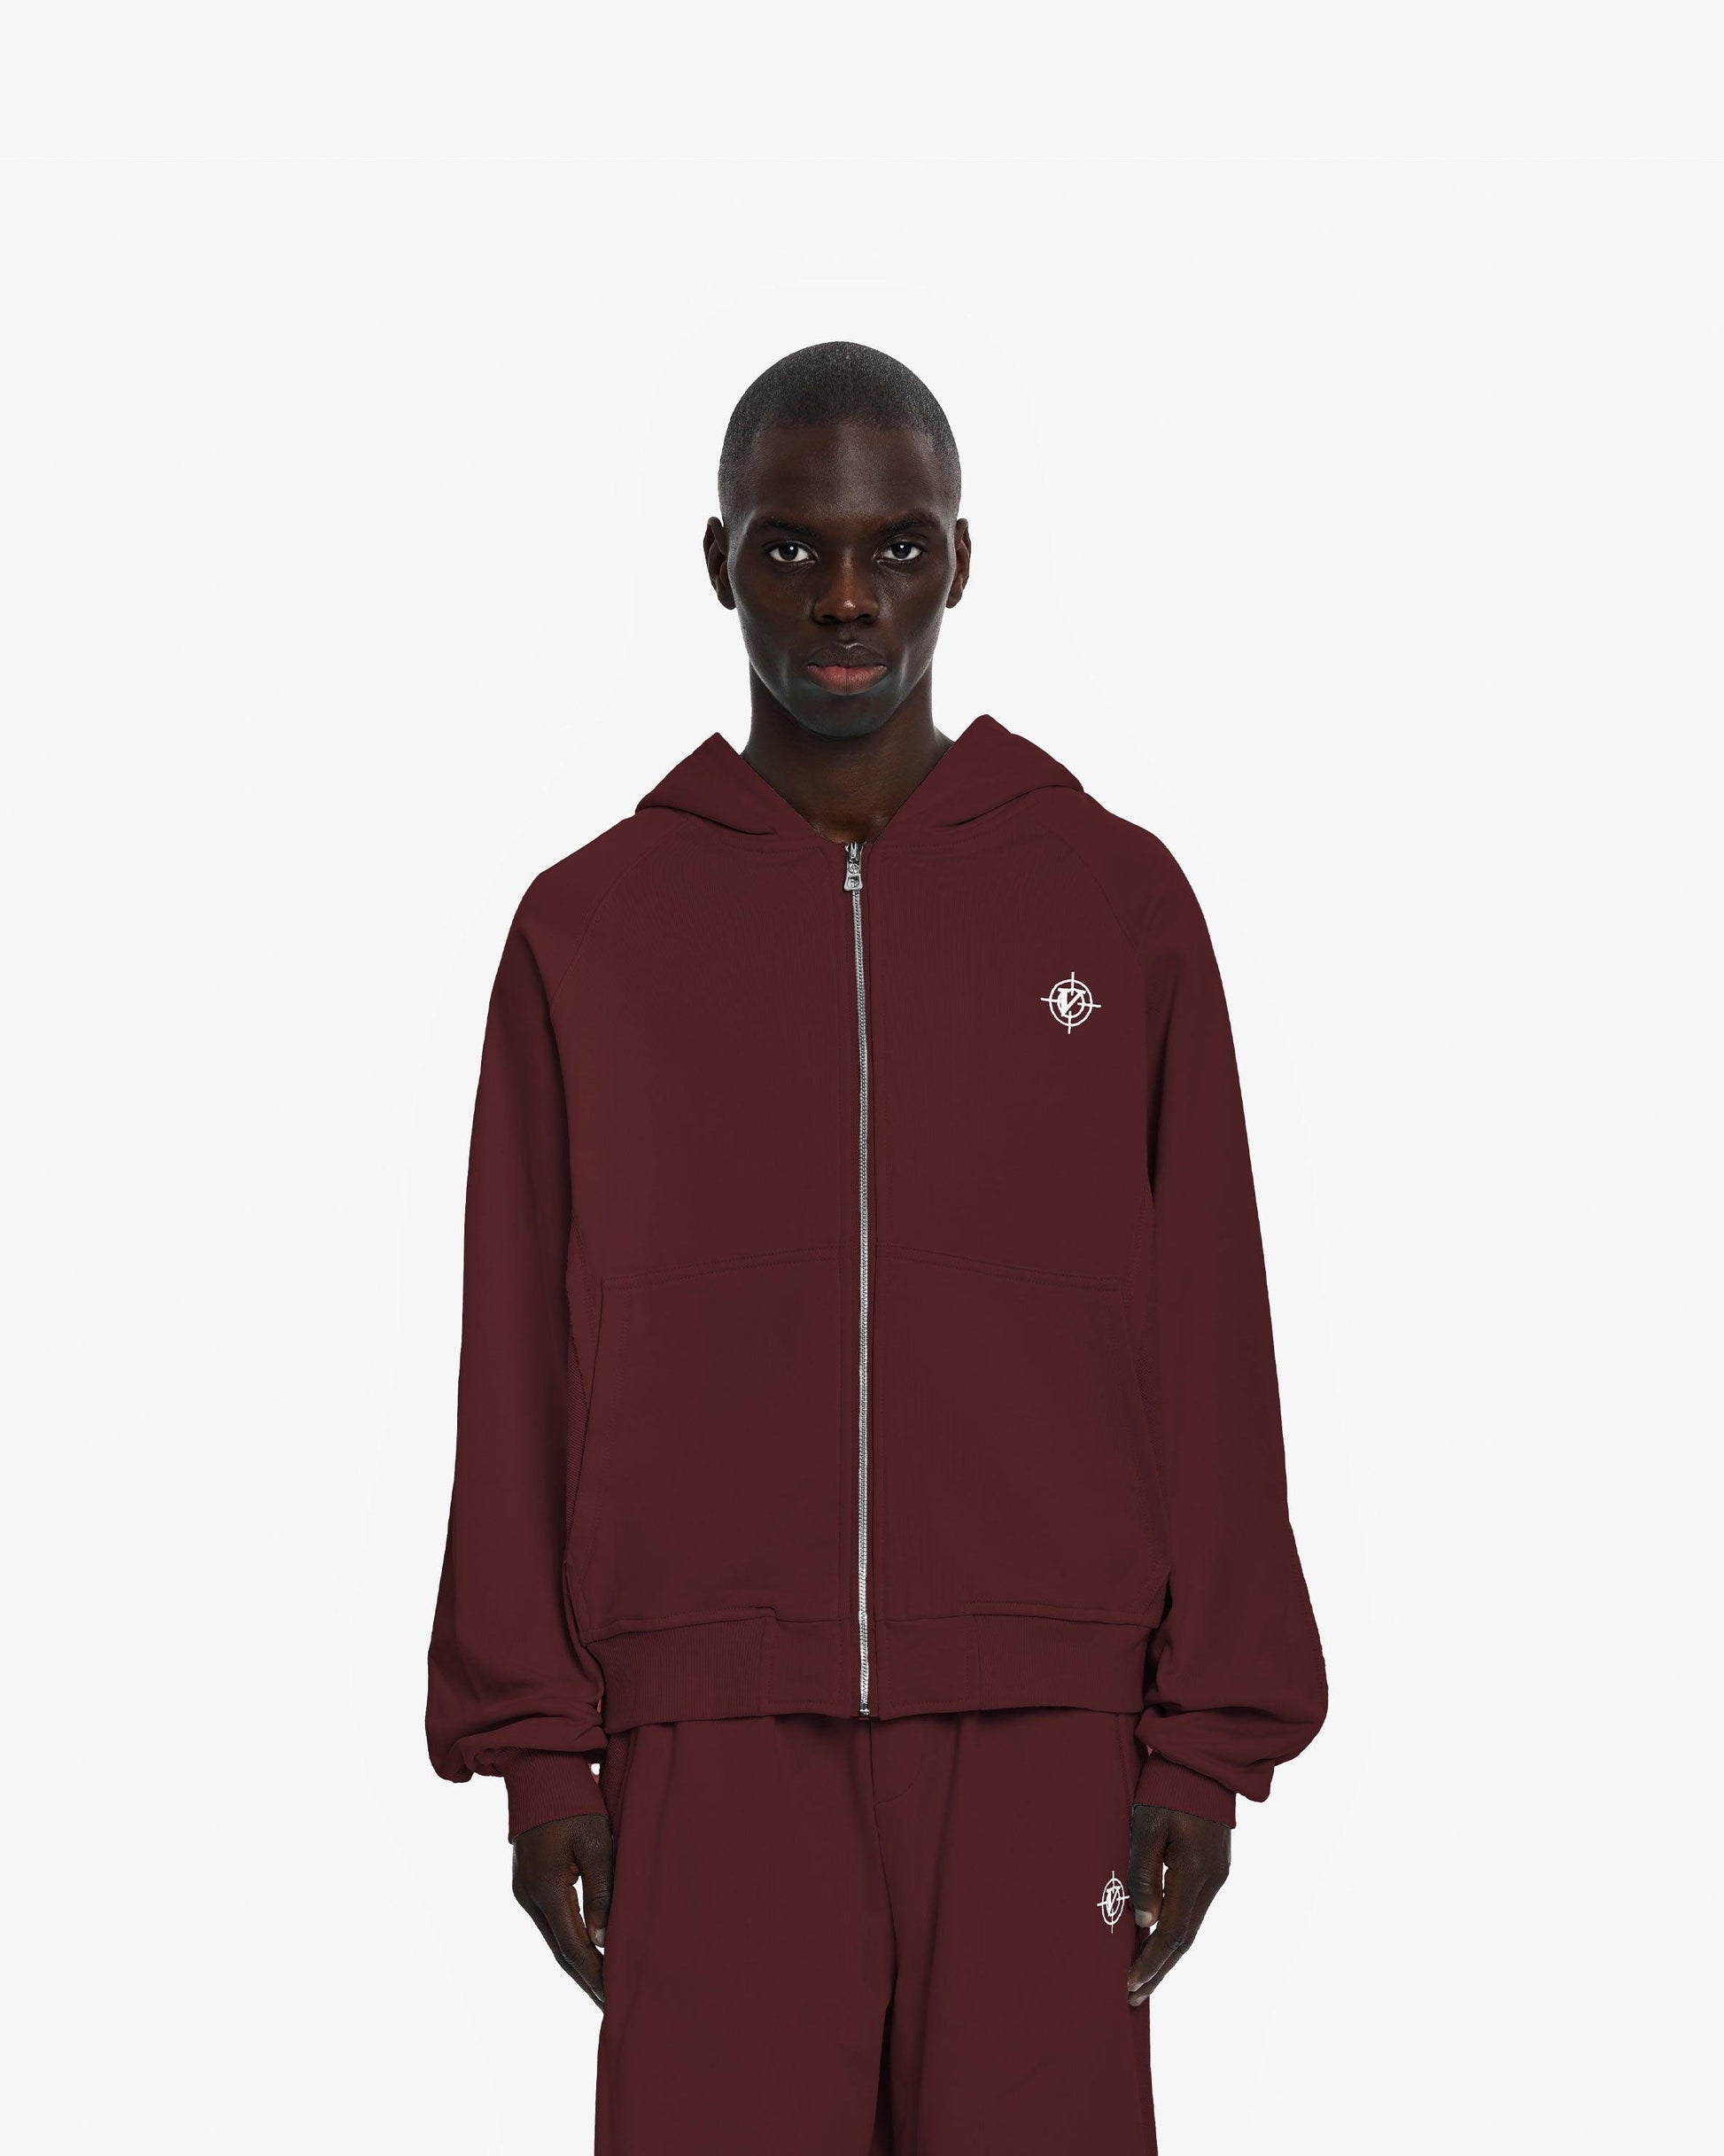 INSIDE OUT ZIP HOODIE WINE RED - VICINITY